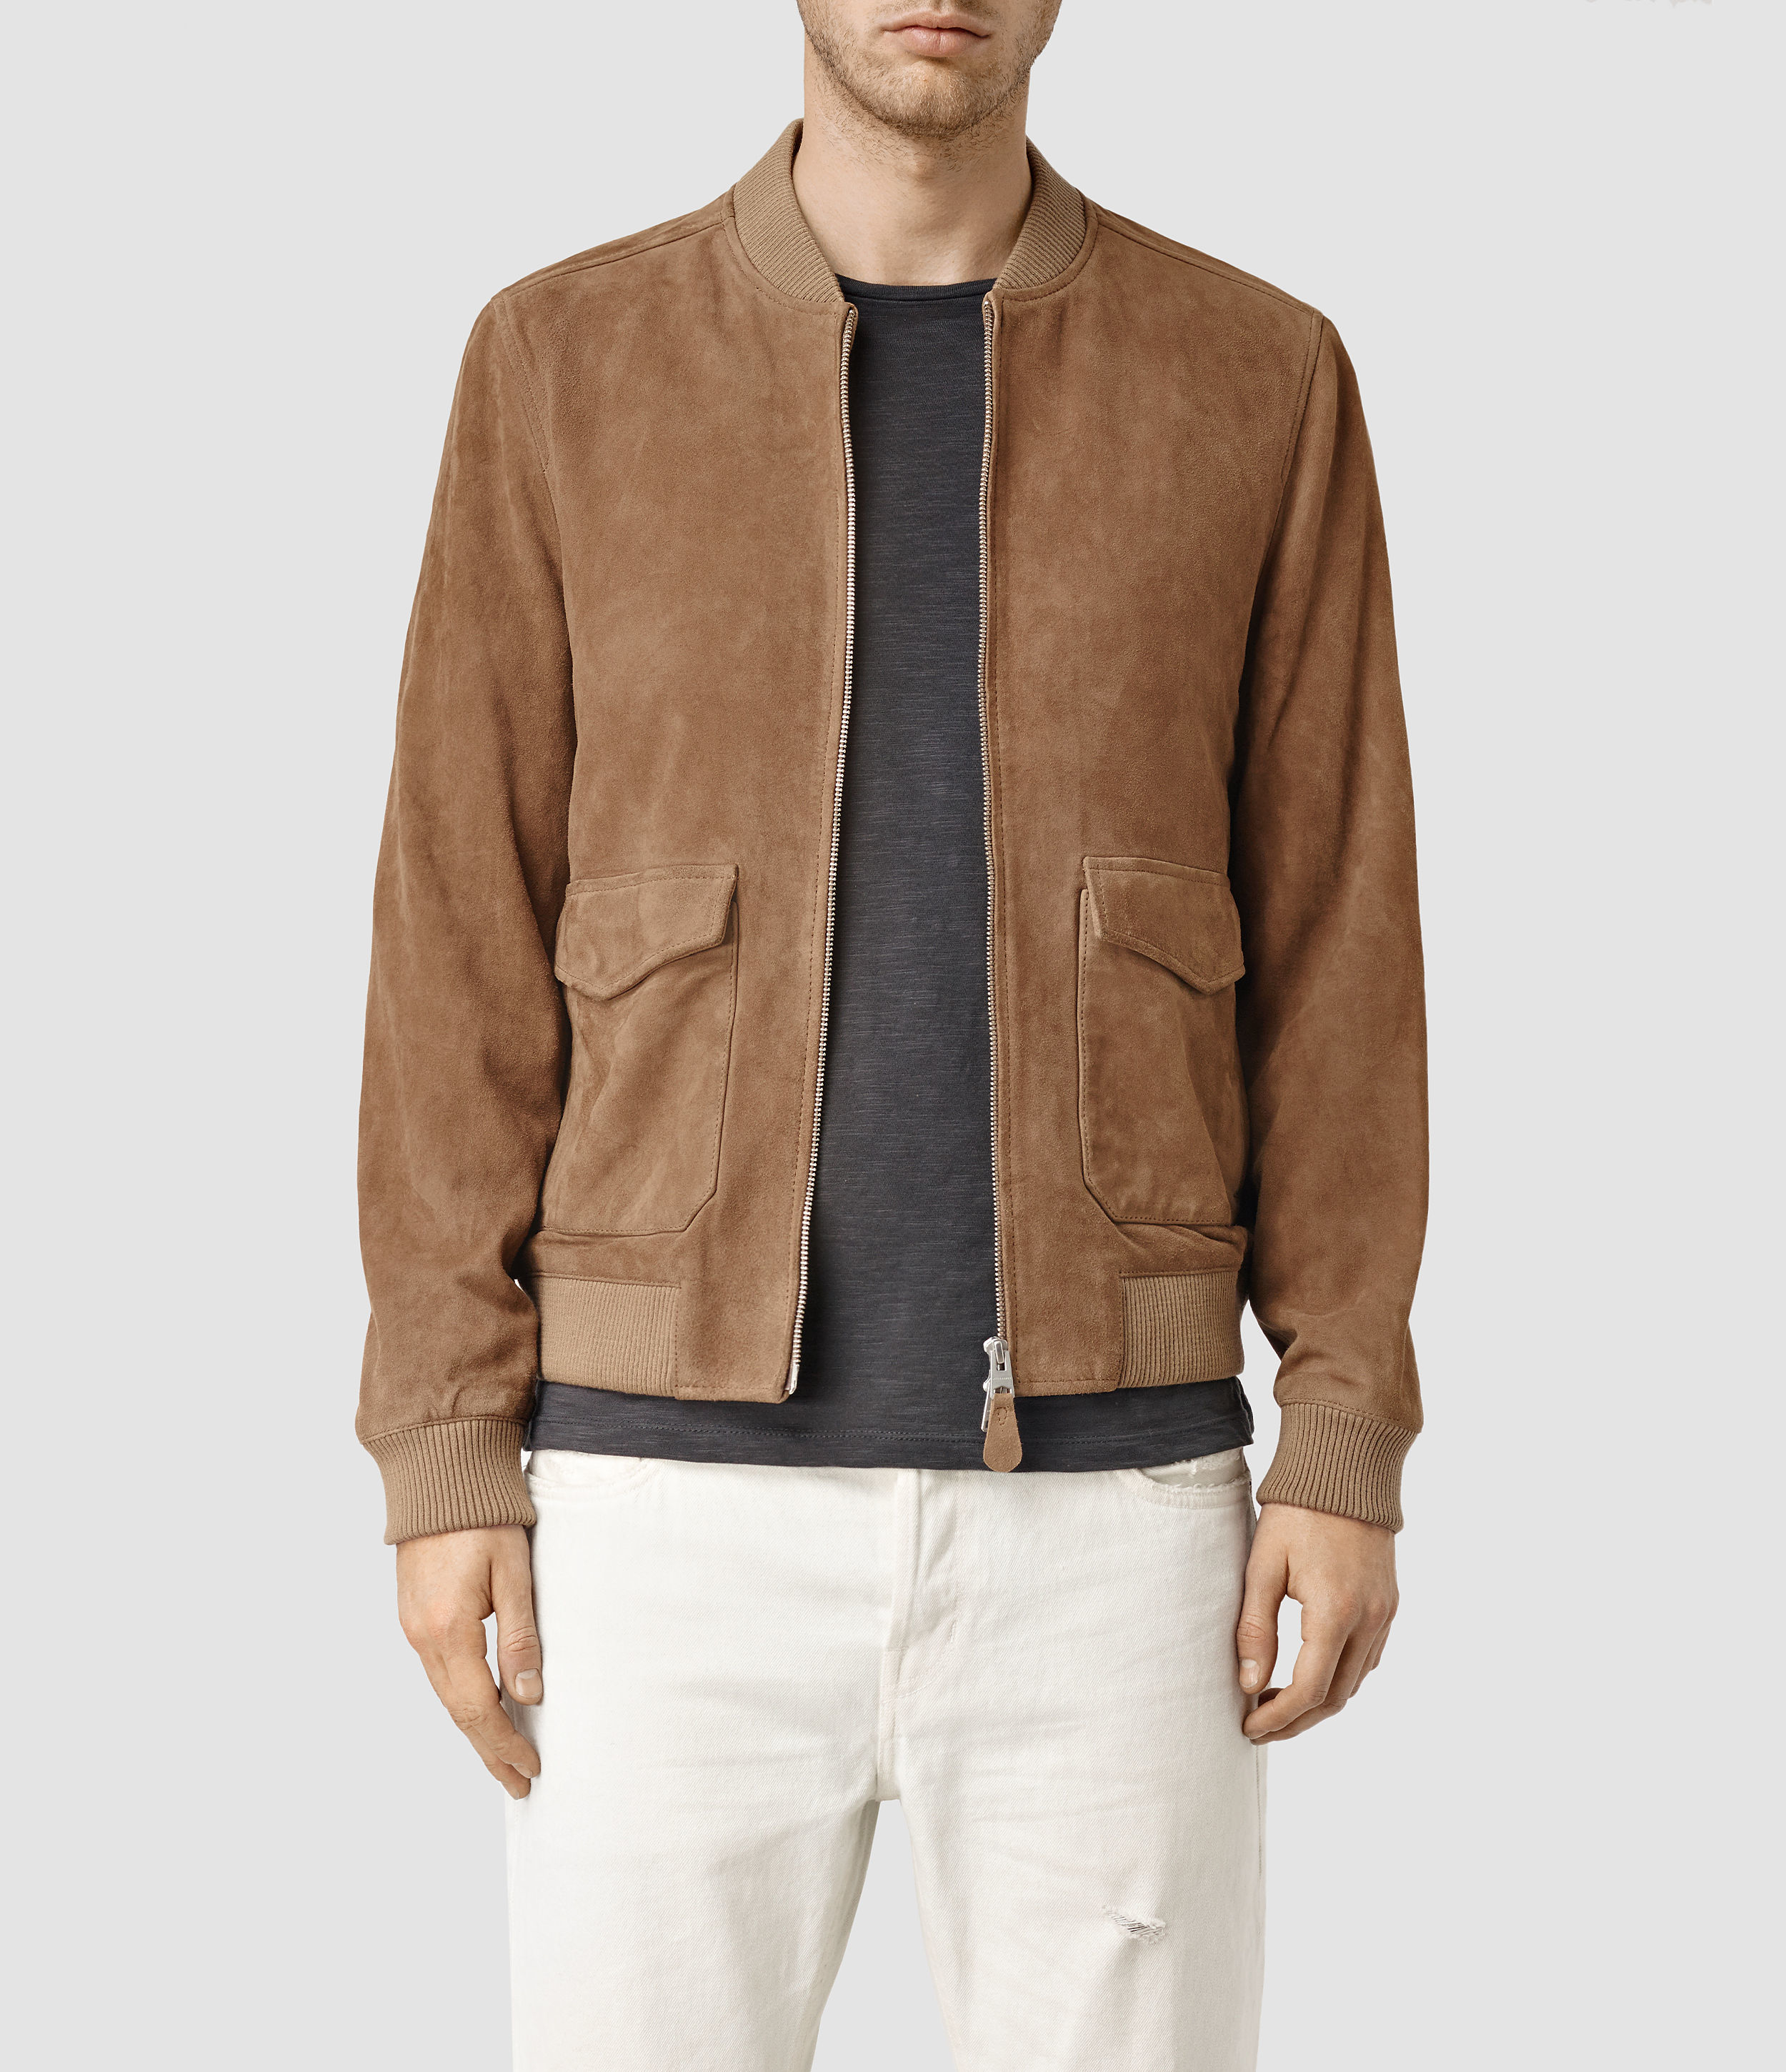 Lyst - Allsaints Bloomington Leather Bomber Jacket Usa Usa in Brown for Men